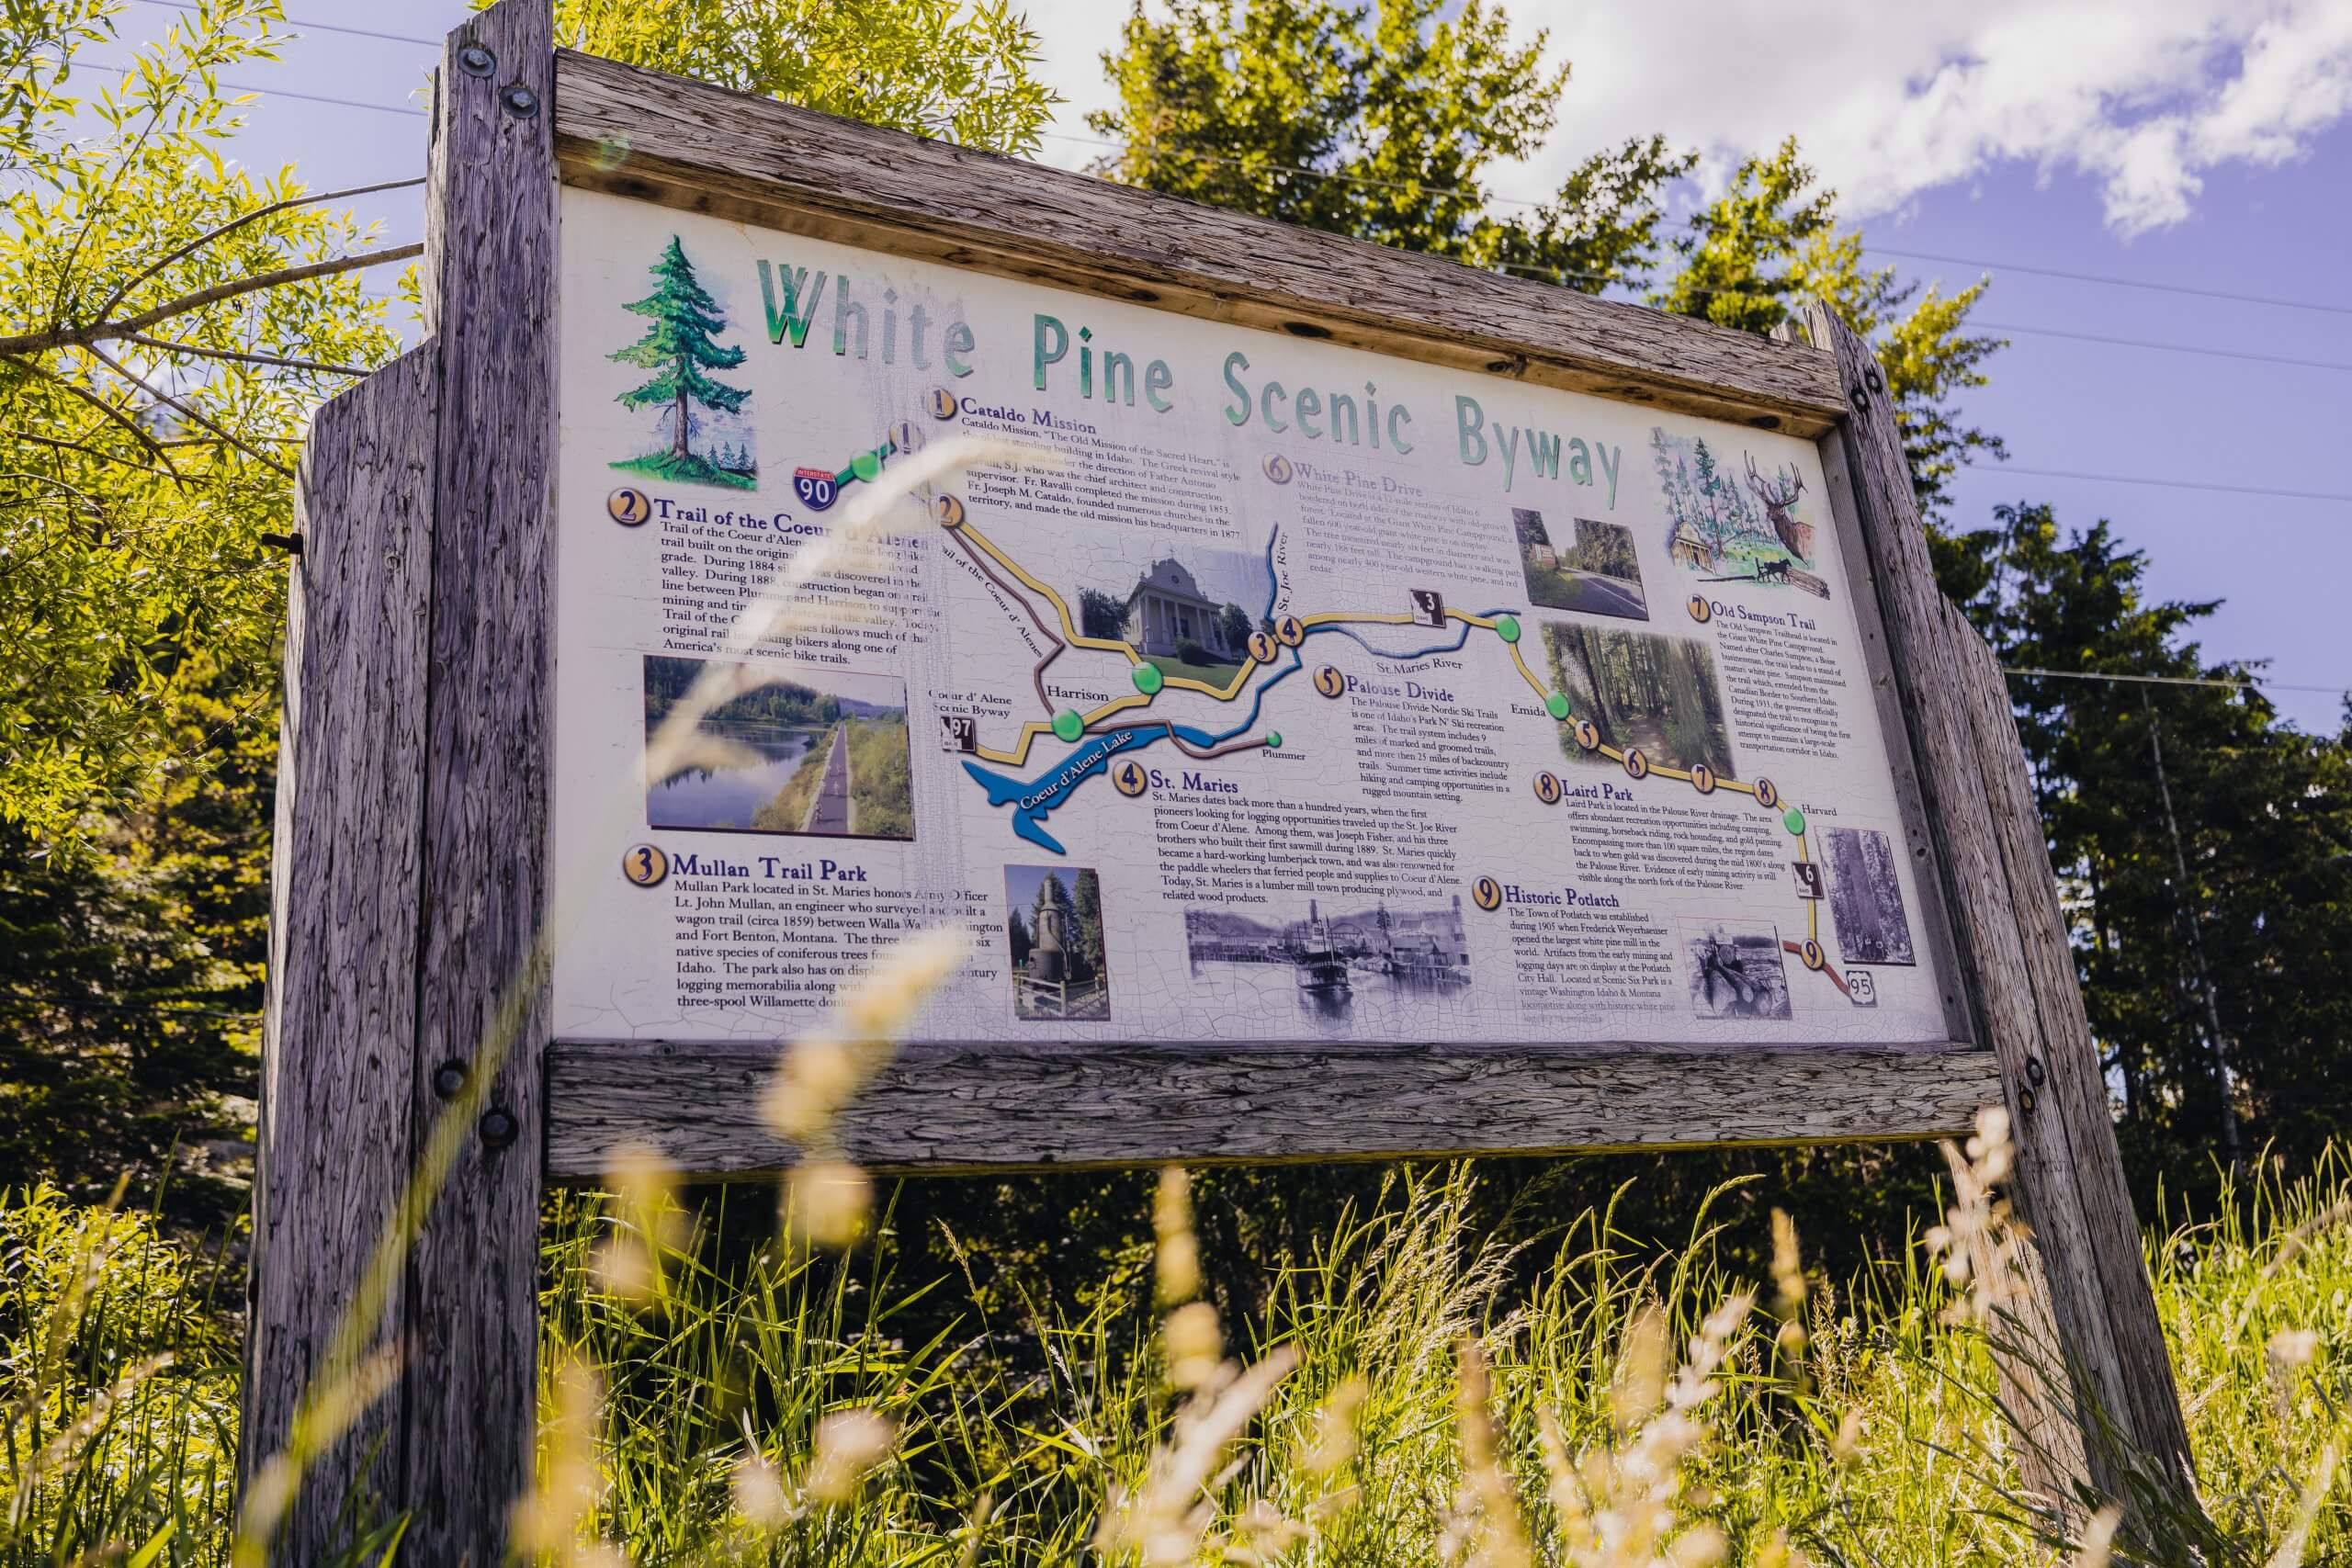 A White Pine Scenic Byway sign with a map and information.